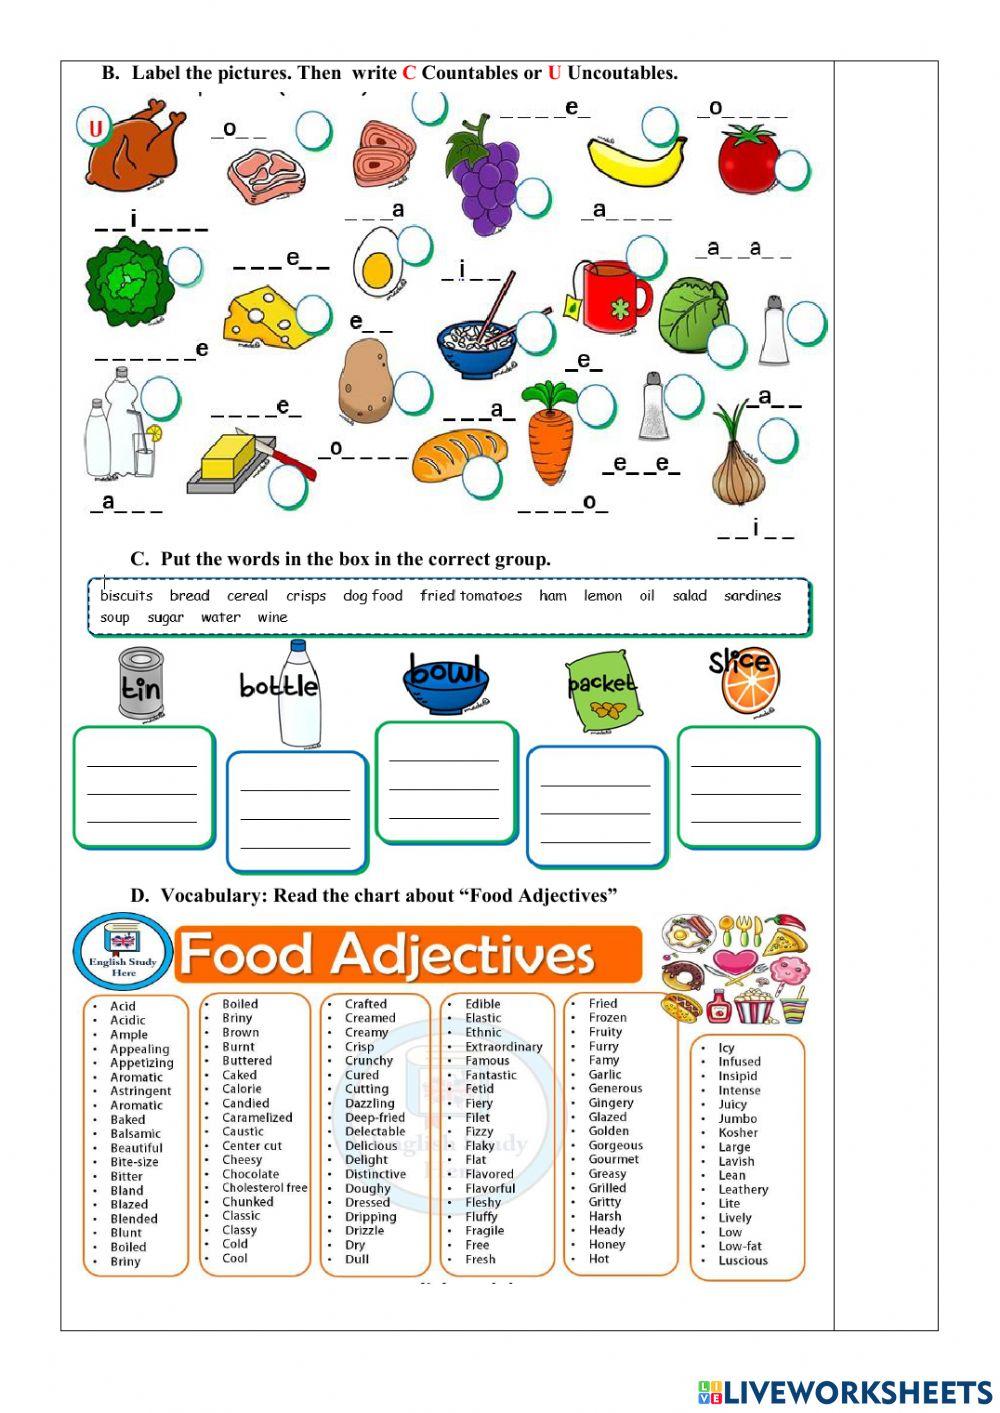 Ejercicios Online- 3rd BGU-Countable and Uncountable nouns - Adjectives